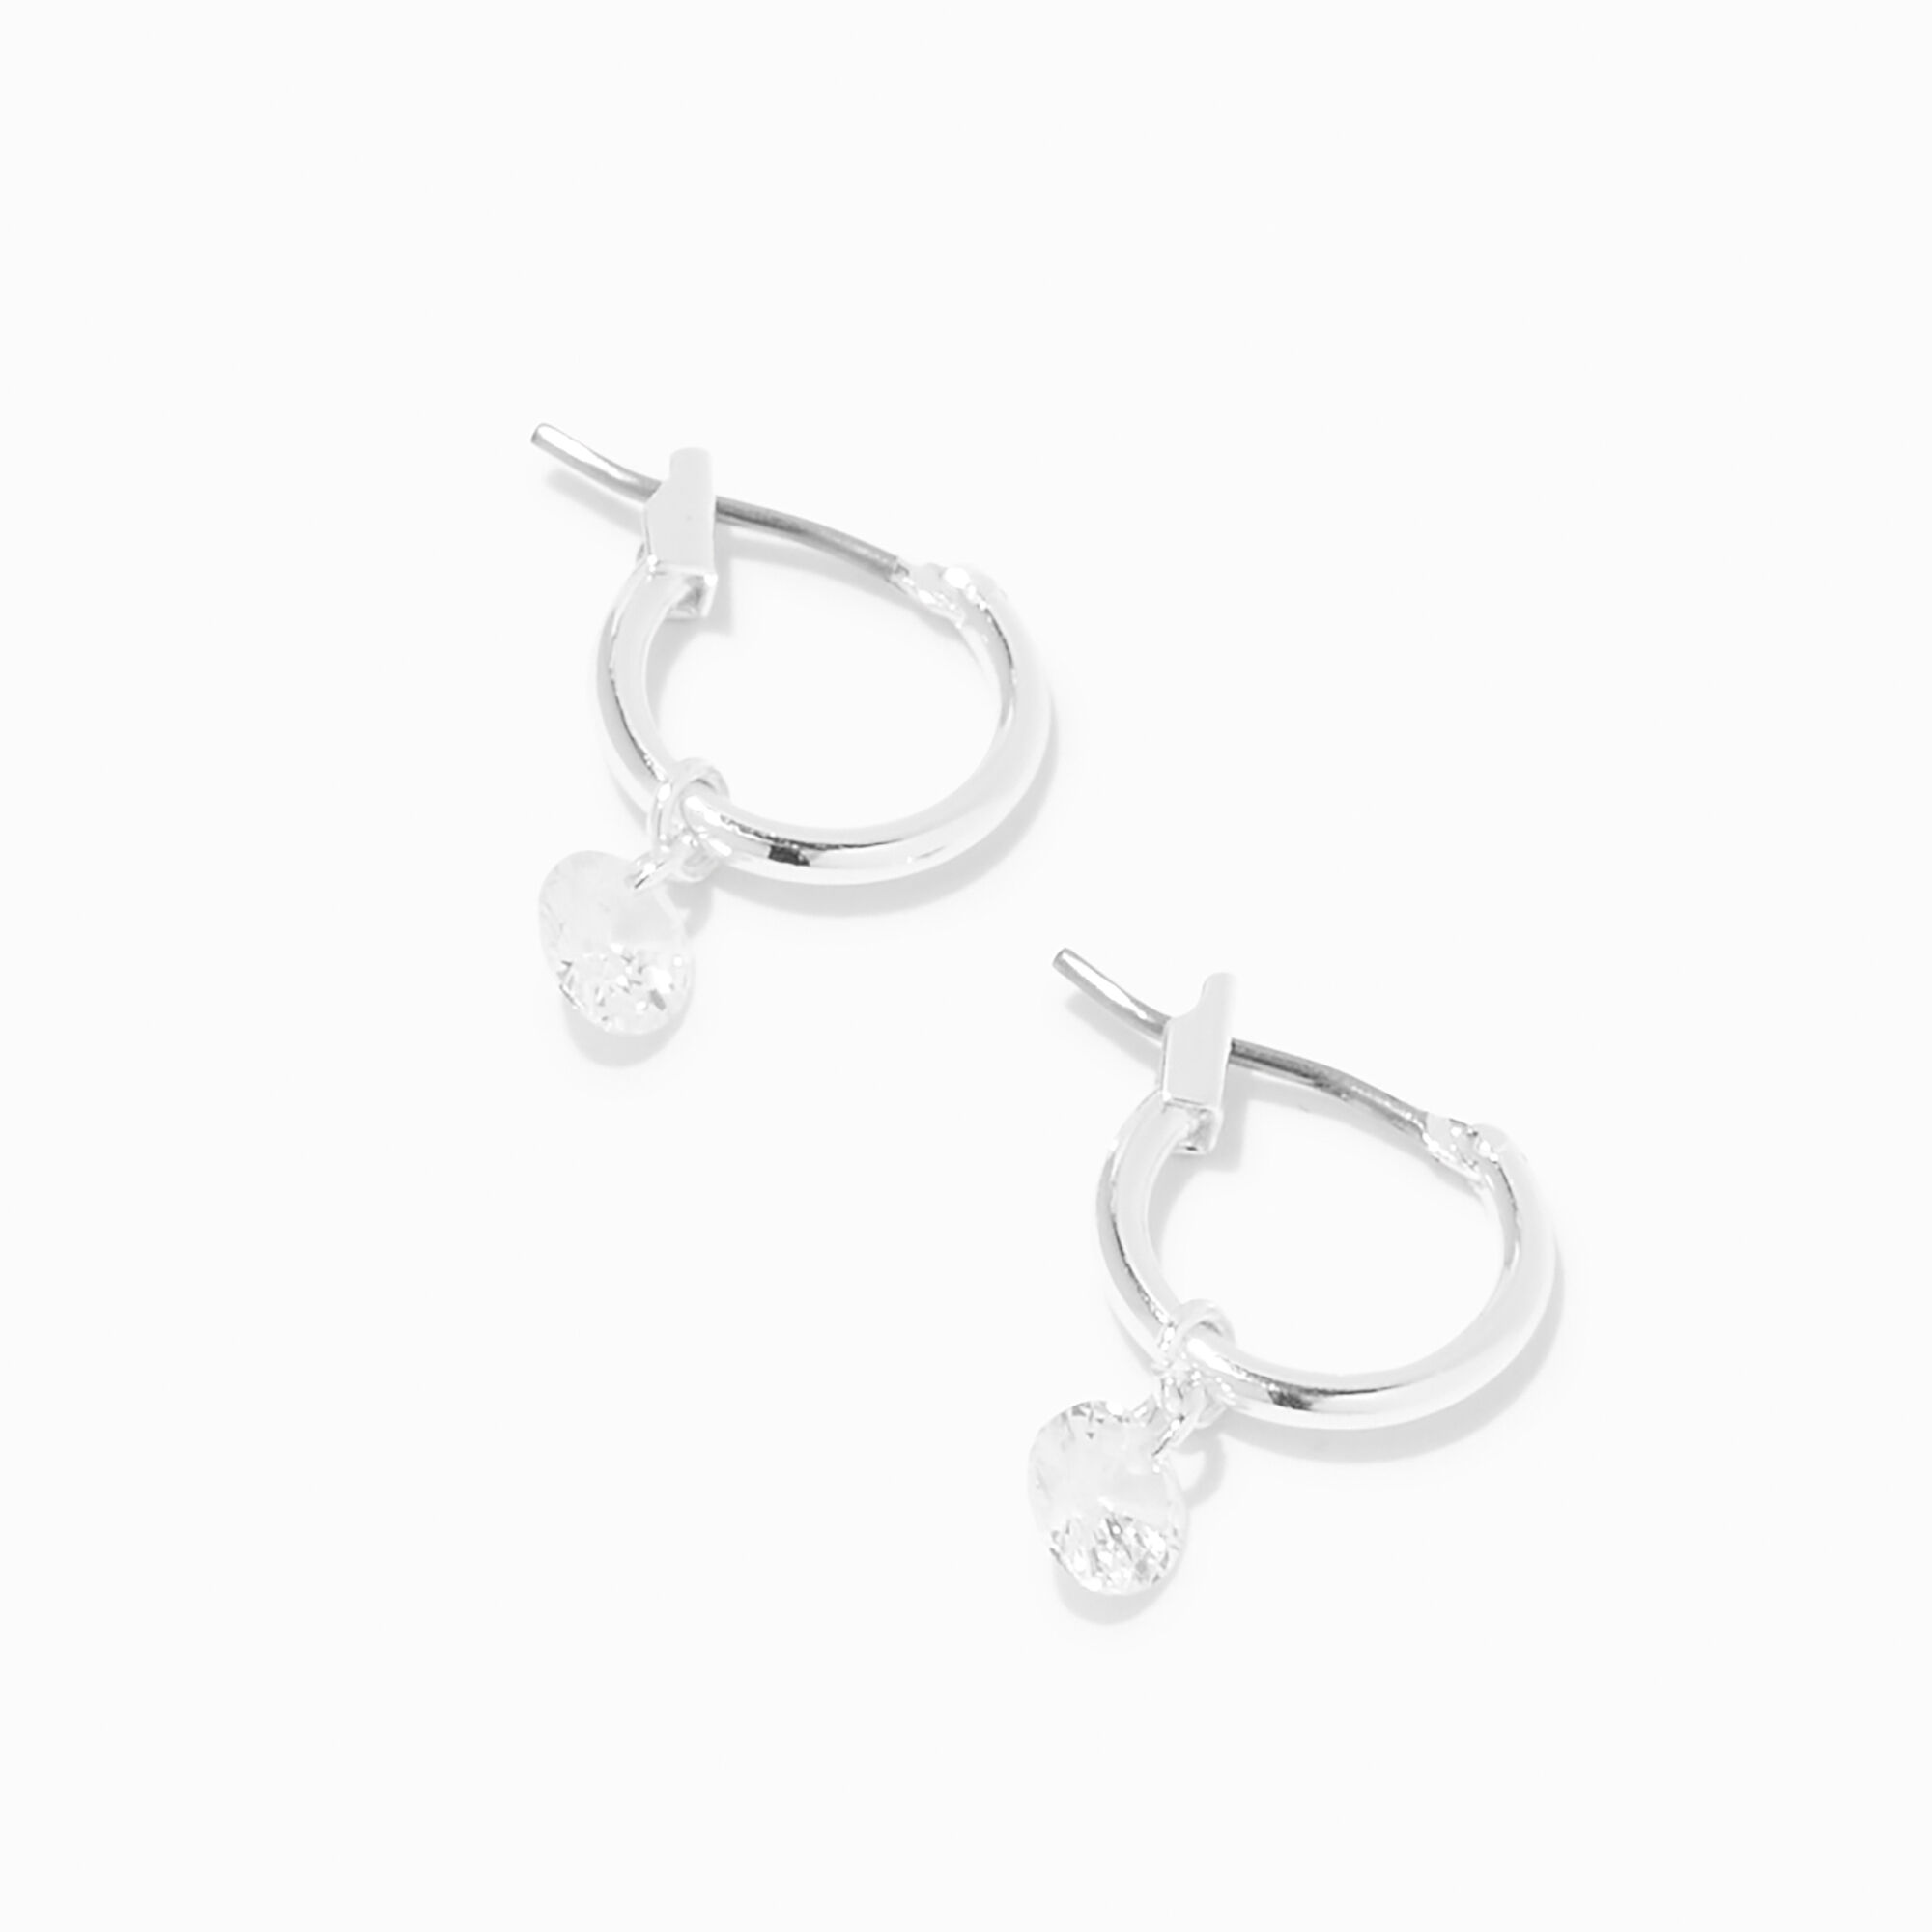 View Claires Tone Cubic Zirconia Charm 10MM Huggie Hoop Earrings Silver information